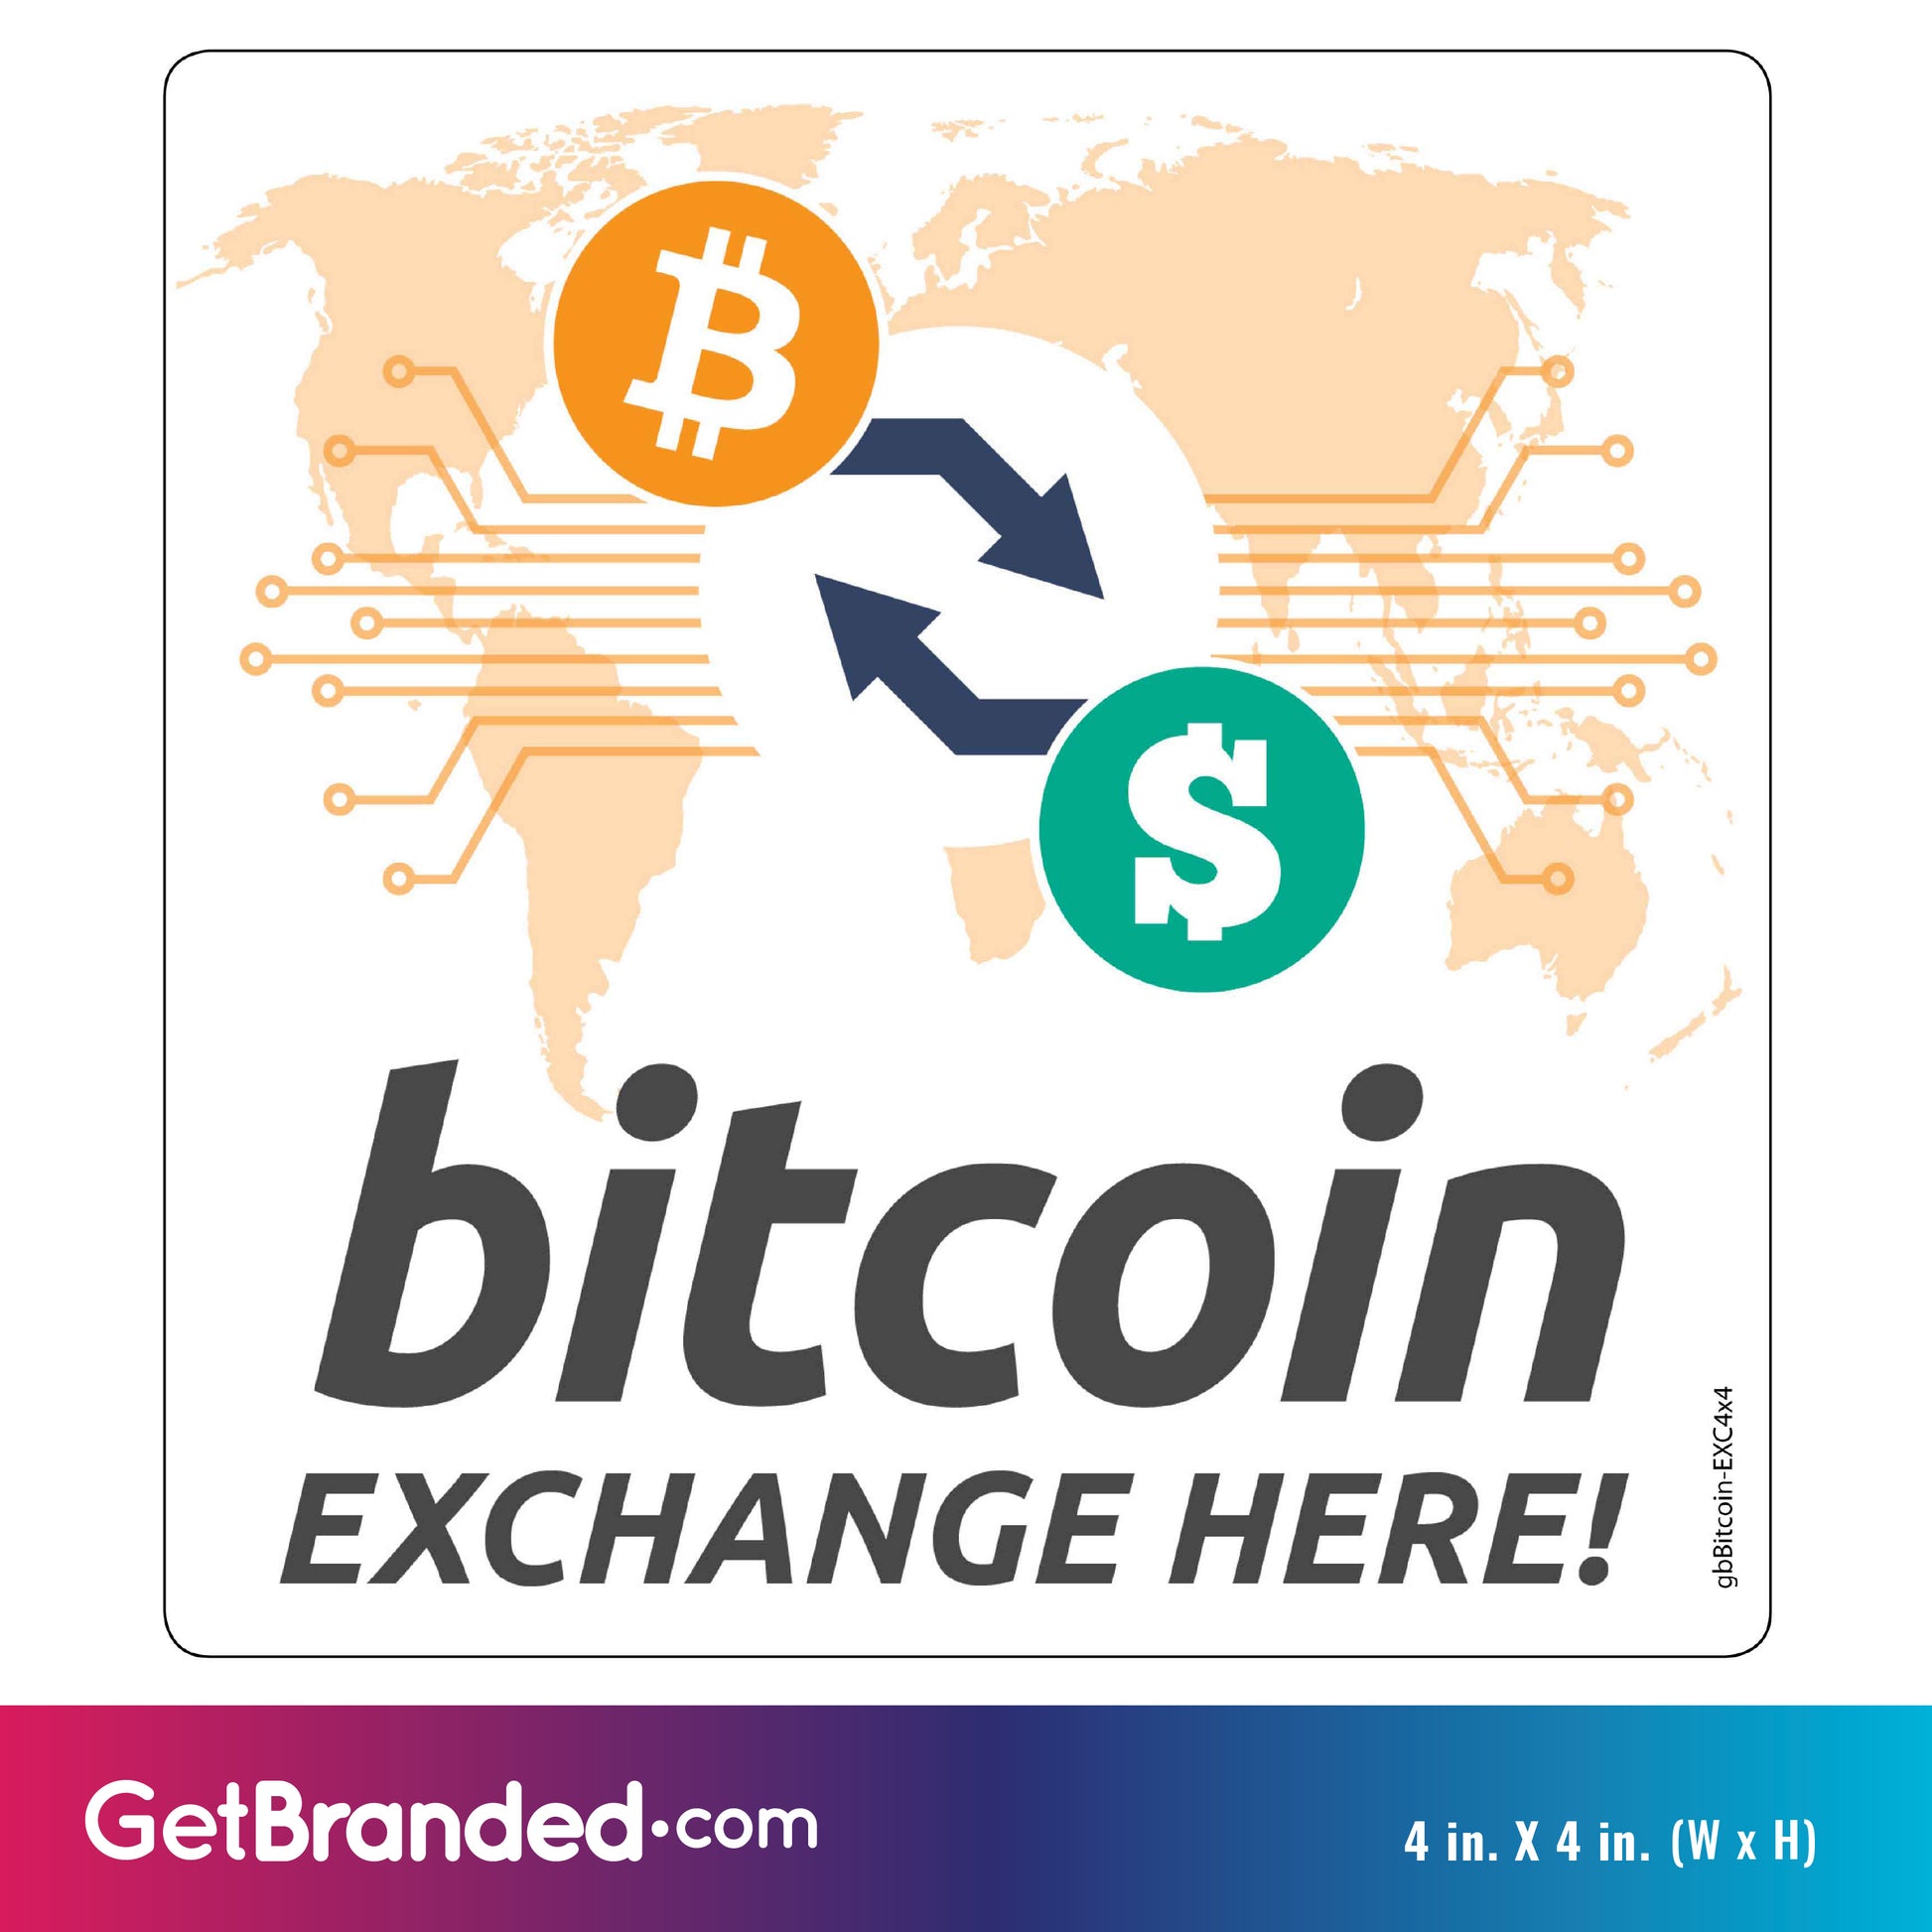 Bitcoin Exchange Here Decal size guide. 4 inches by 4 inches in size.